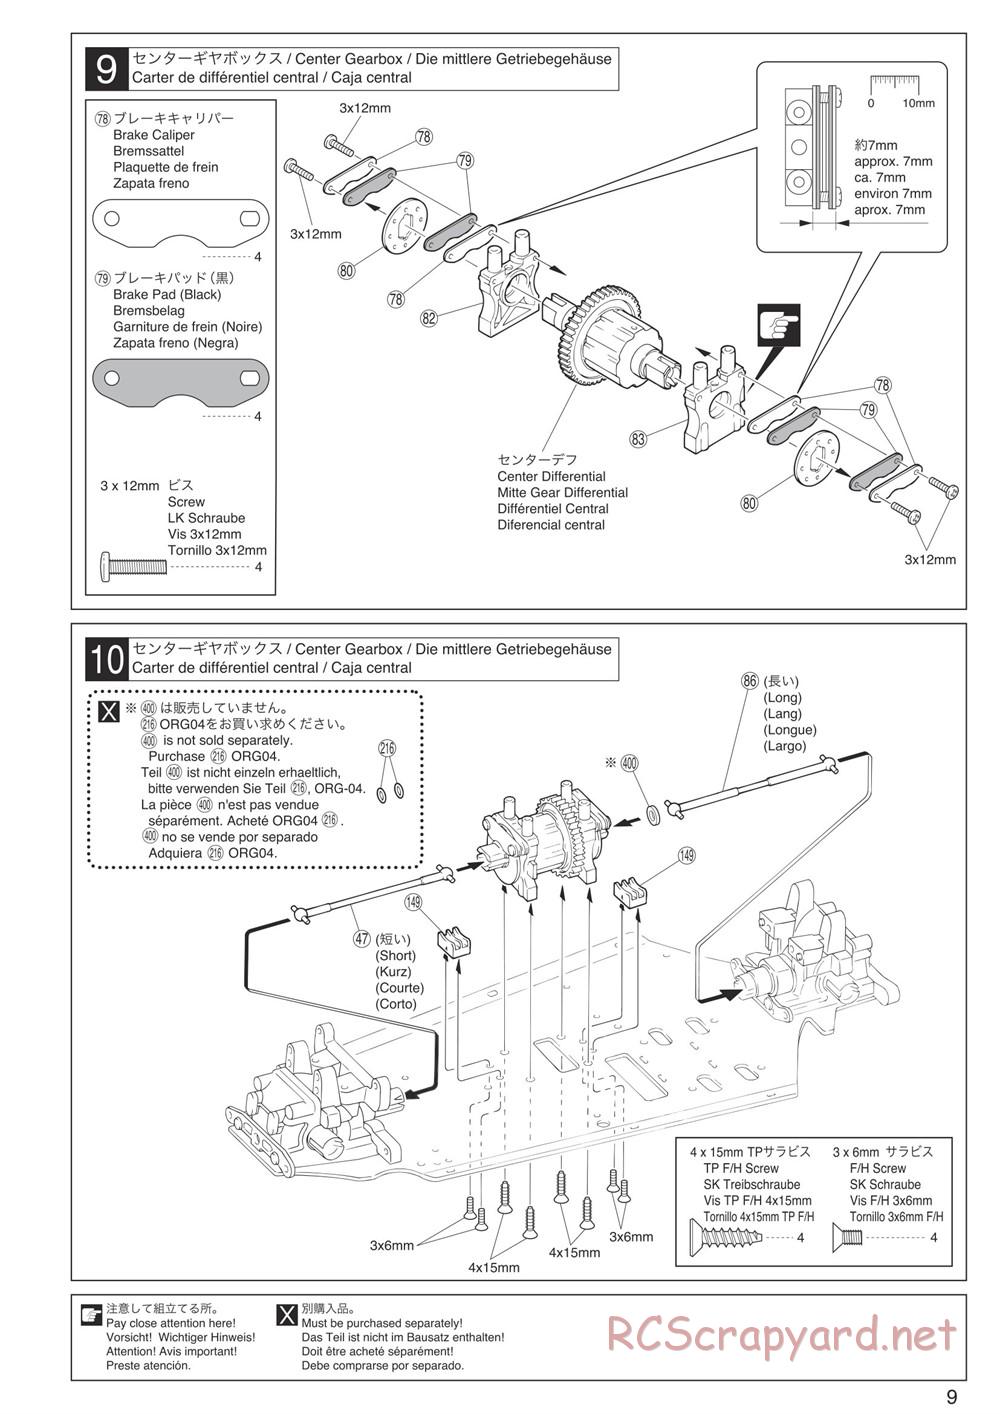 Kyosho - Inferno Neo 3.0 - Manual - Page 9